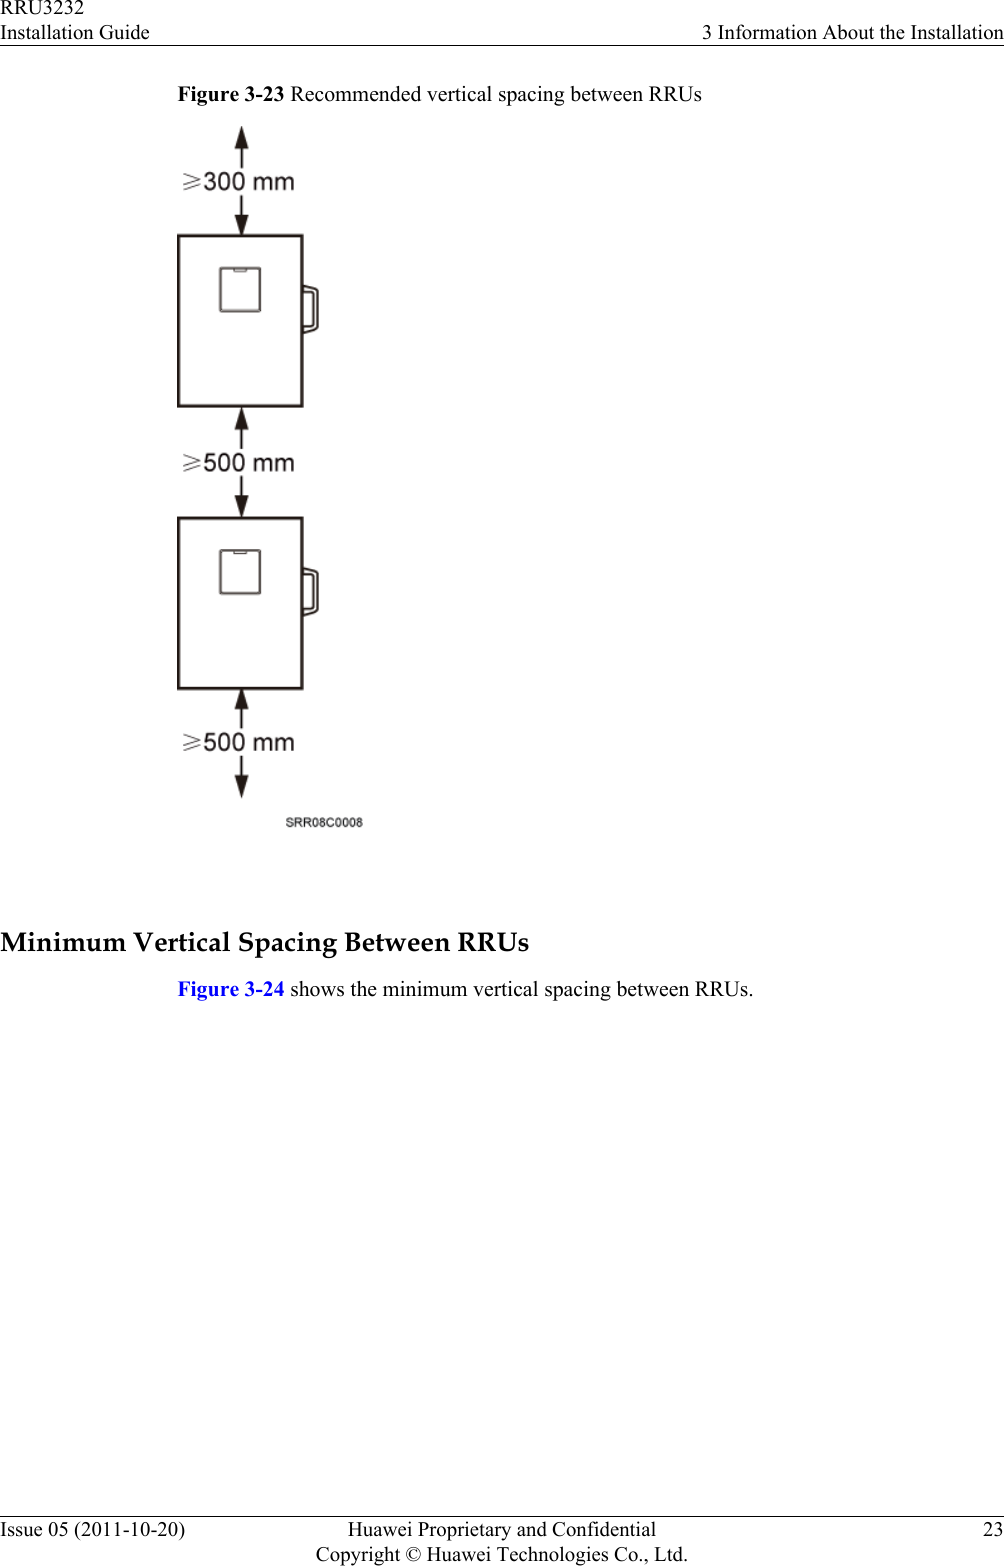 Figure 3-23 Recommended vertical spacing between RRUs Minimum Vertical Spacing Between RRUsFigure 3-24 shows the minimum vertical spacing between RRUs.RRU3232Installation Guide 3 Information About the InstallationIssue 05 (2011-10-20) Huawei Proprietary and ConfidentialCopyright © Huawei Technologies Co., Ltd.23